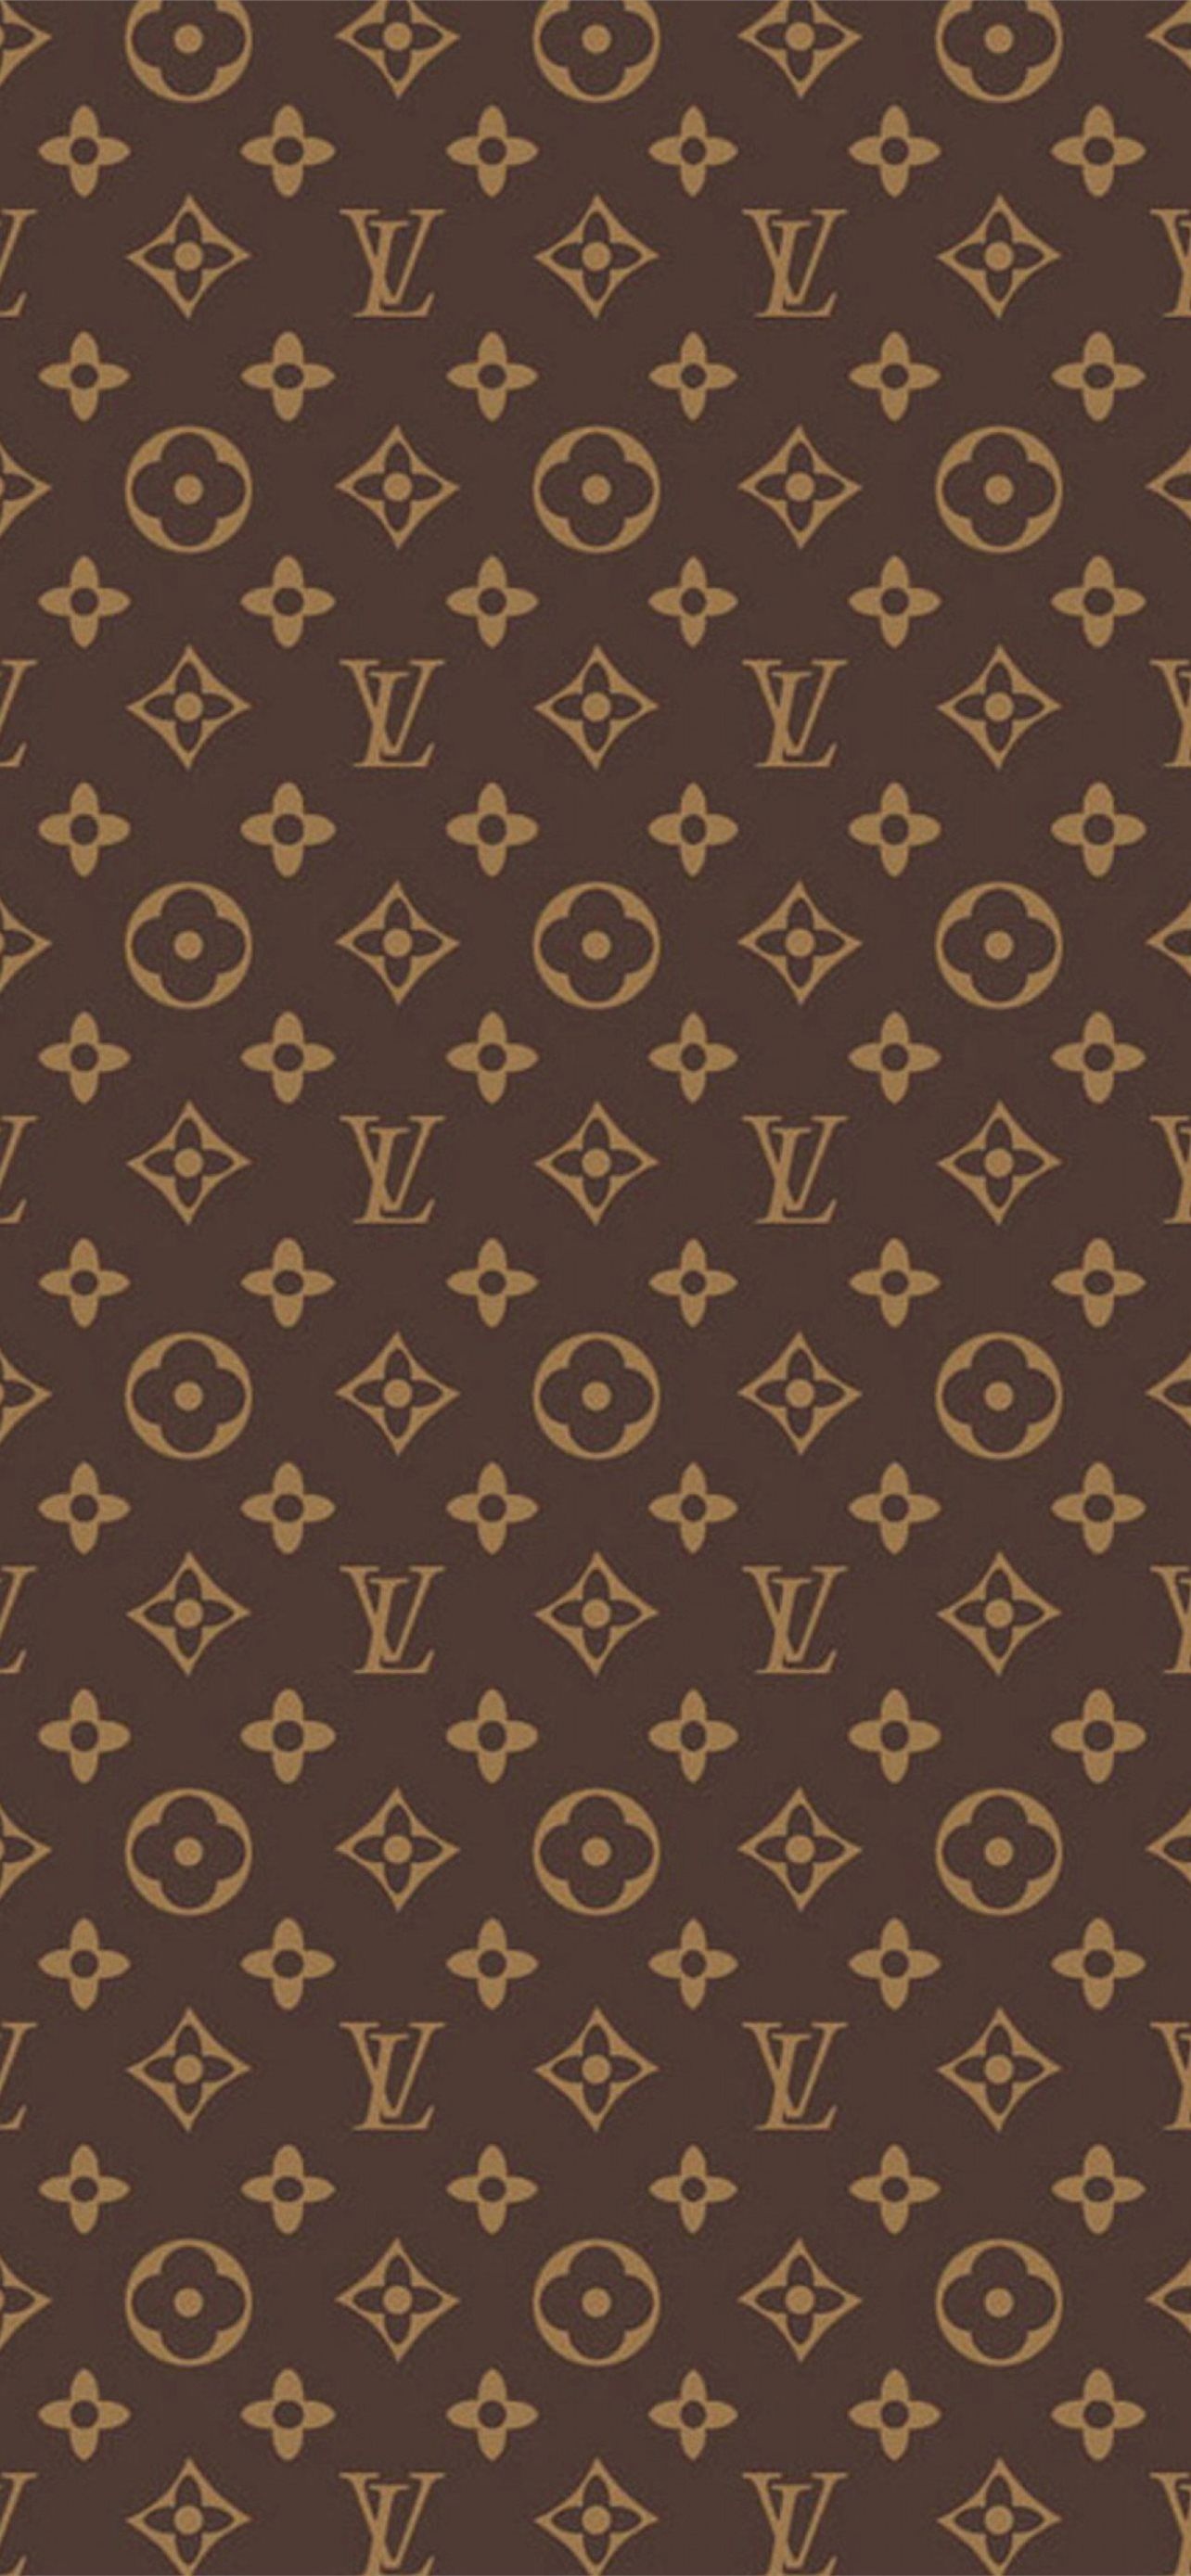 Louis Vuitton iPhone wallpaper with high-resolution 1080x1920 pixel. You can use this wallpaper for your iPhone 5, 6, 7, 8, X, XS, XR backgrounds, Mobile Screensaver, or iPad Lock Screen - Chanel, Louis Vuitton